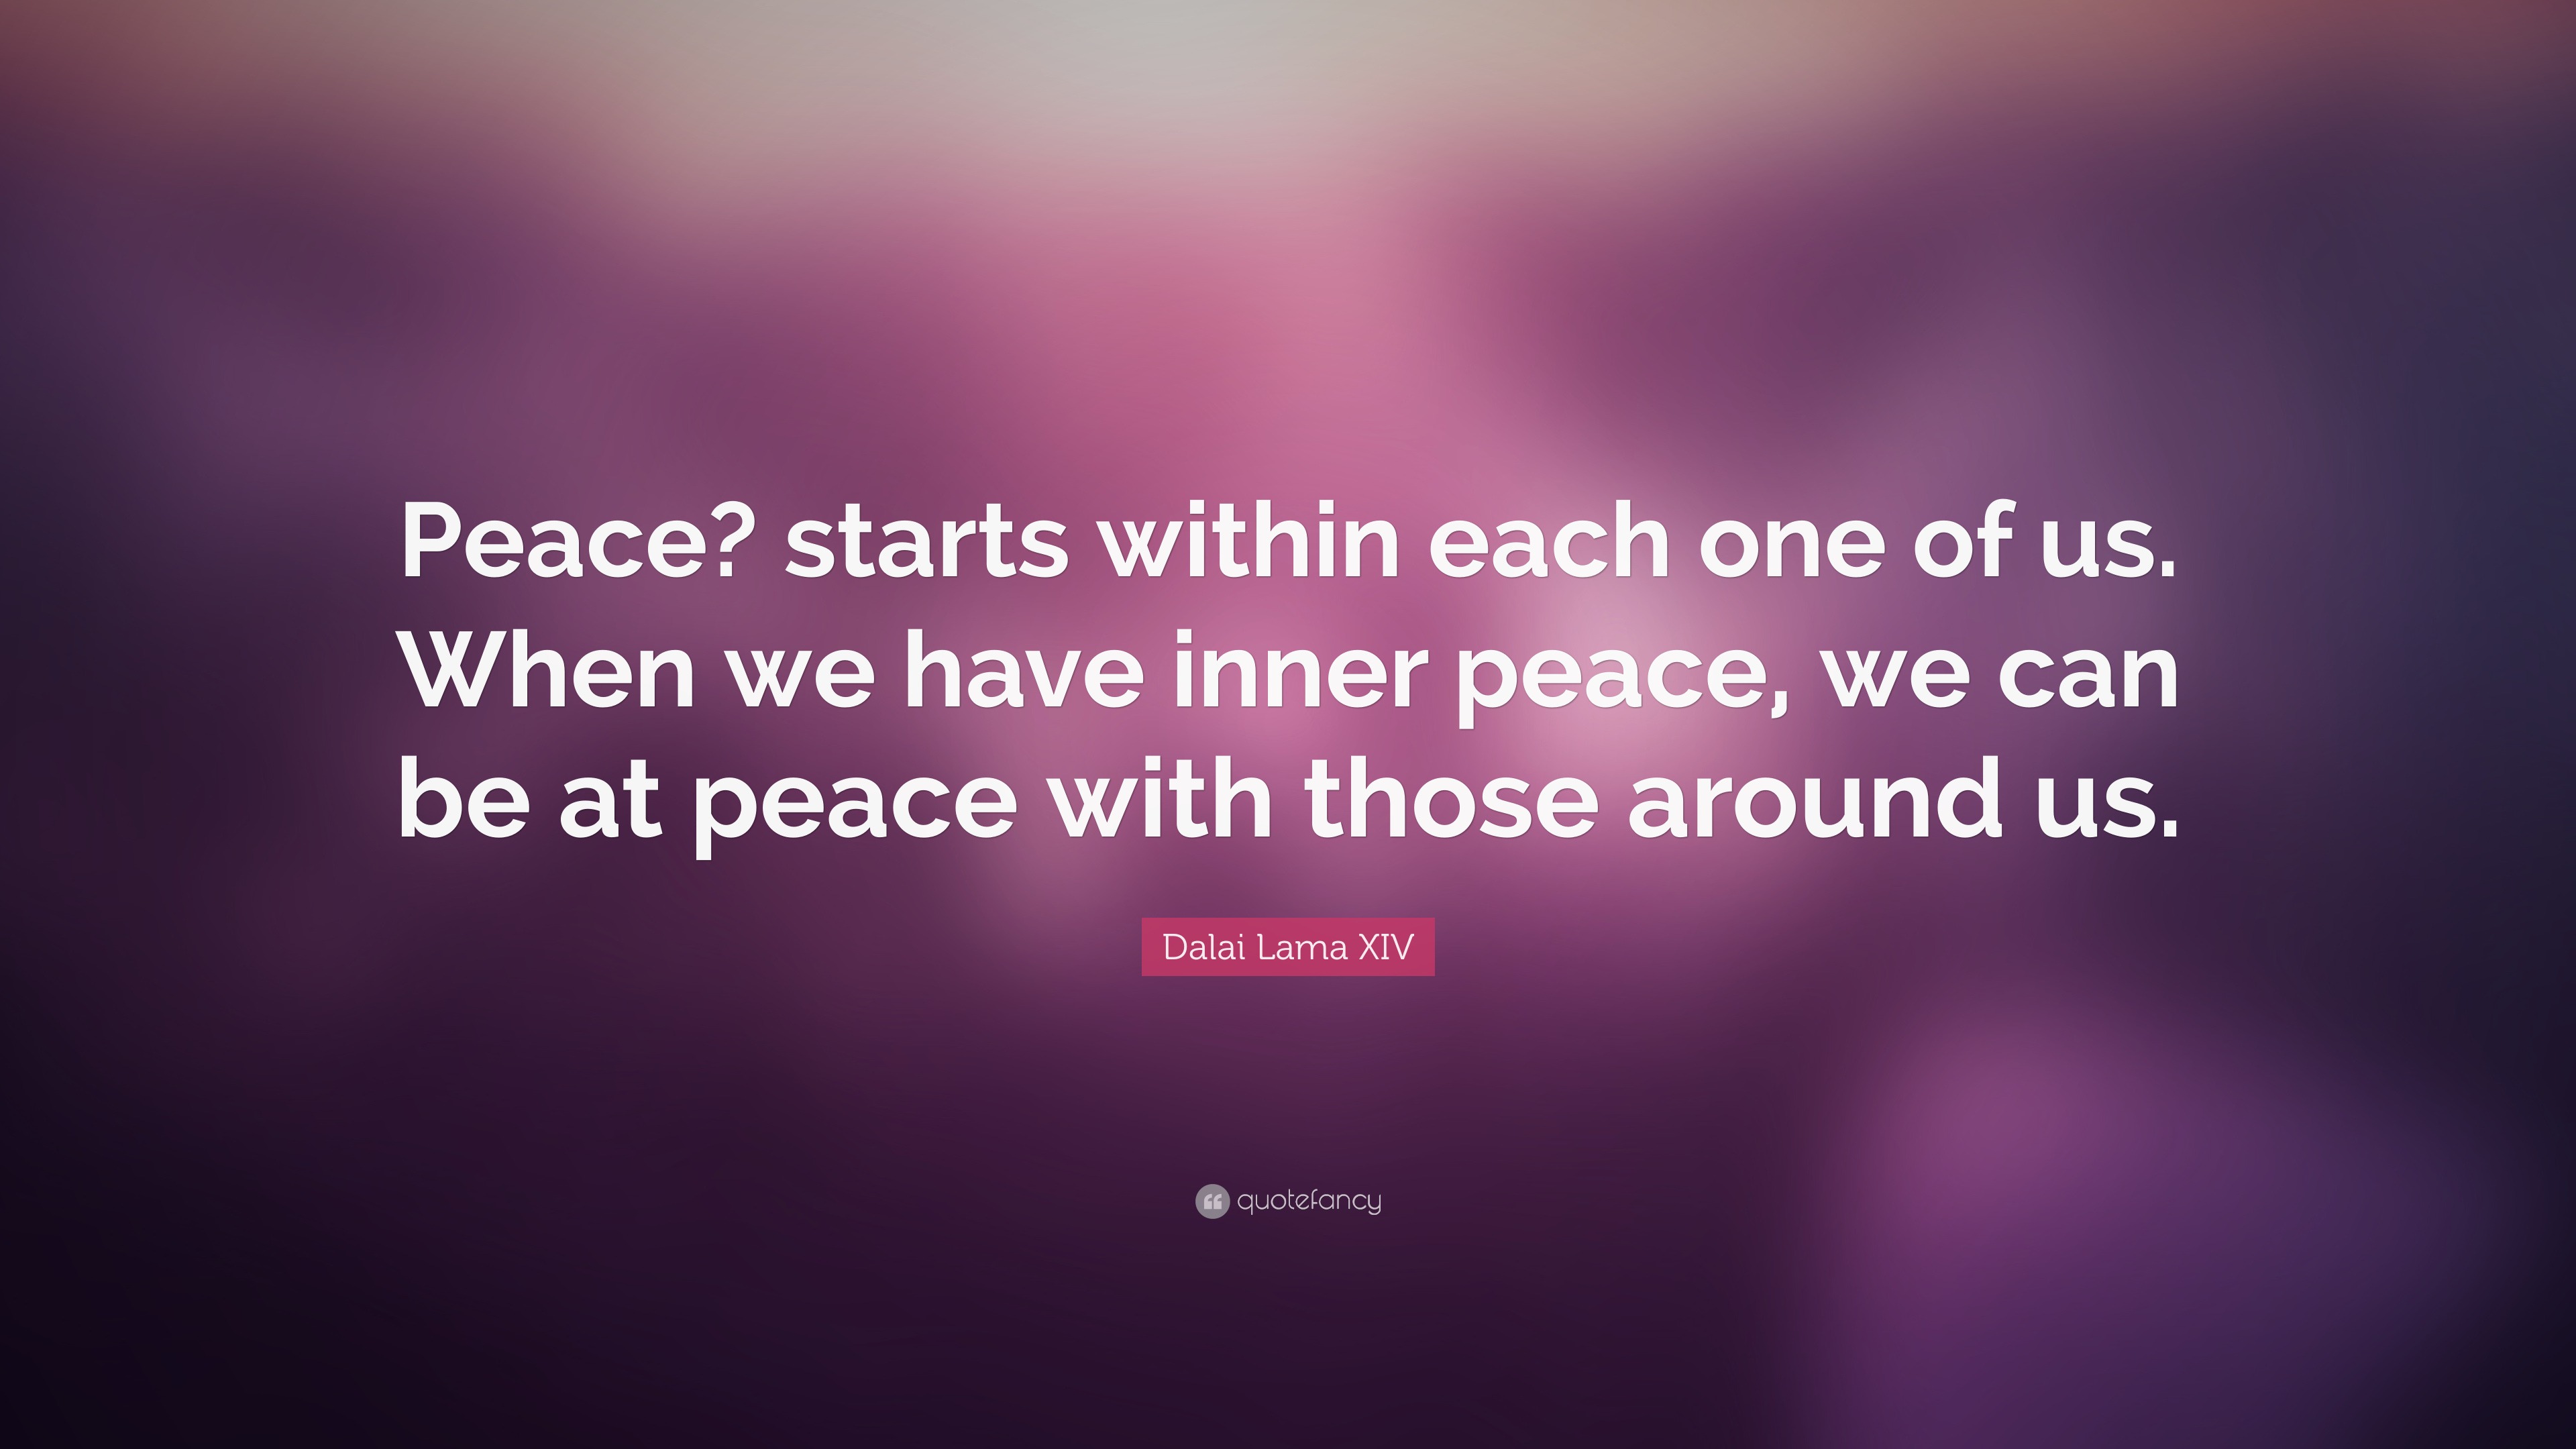 Dalai Lama XIV Quote: “Peace? starts within each one of us. When we ...